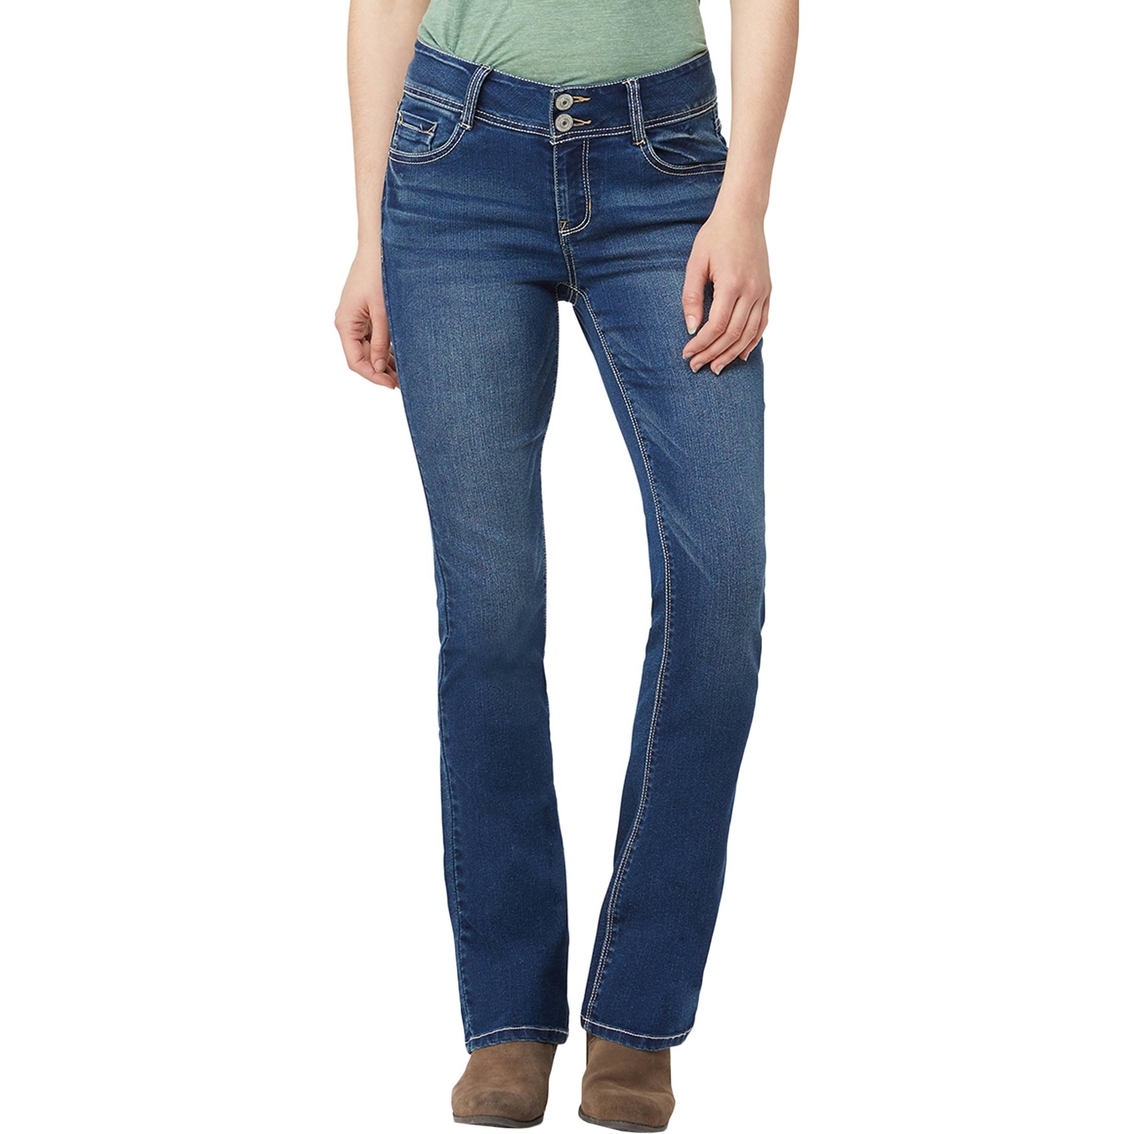 Ymi Jeans Juniors Curvy Skinny Jeans, Jeans, Clothing & Accessories